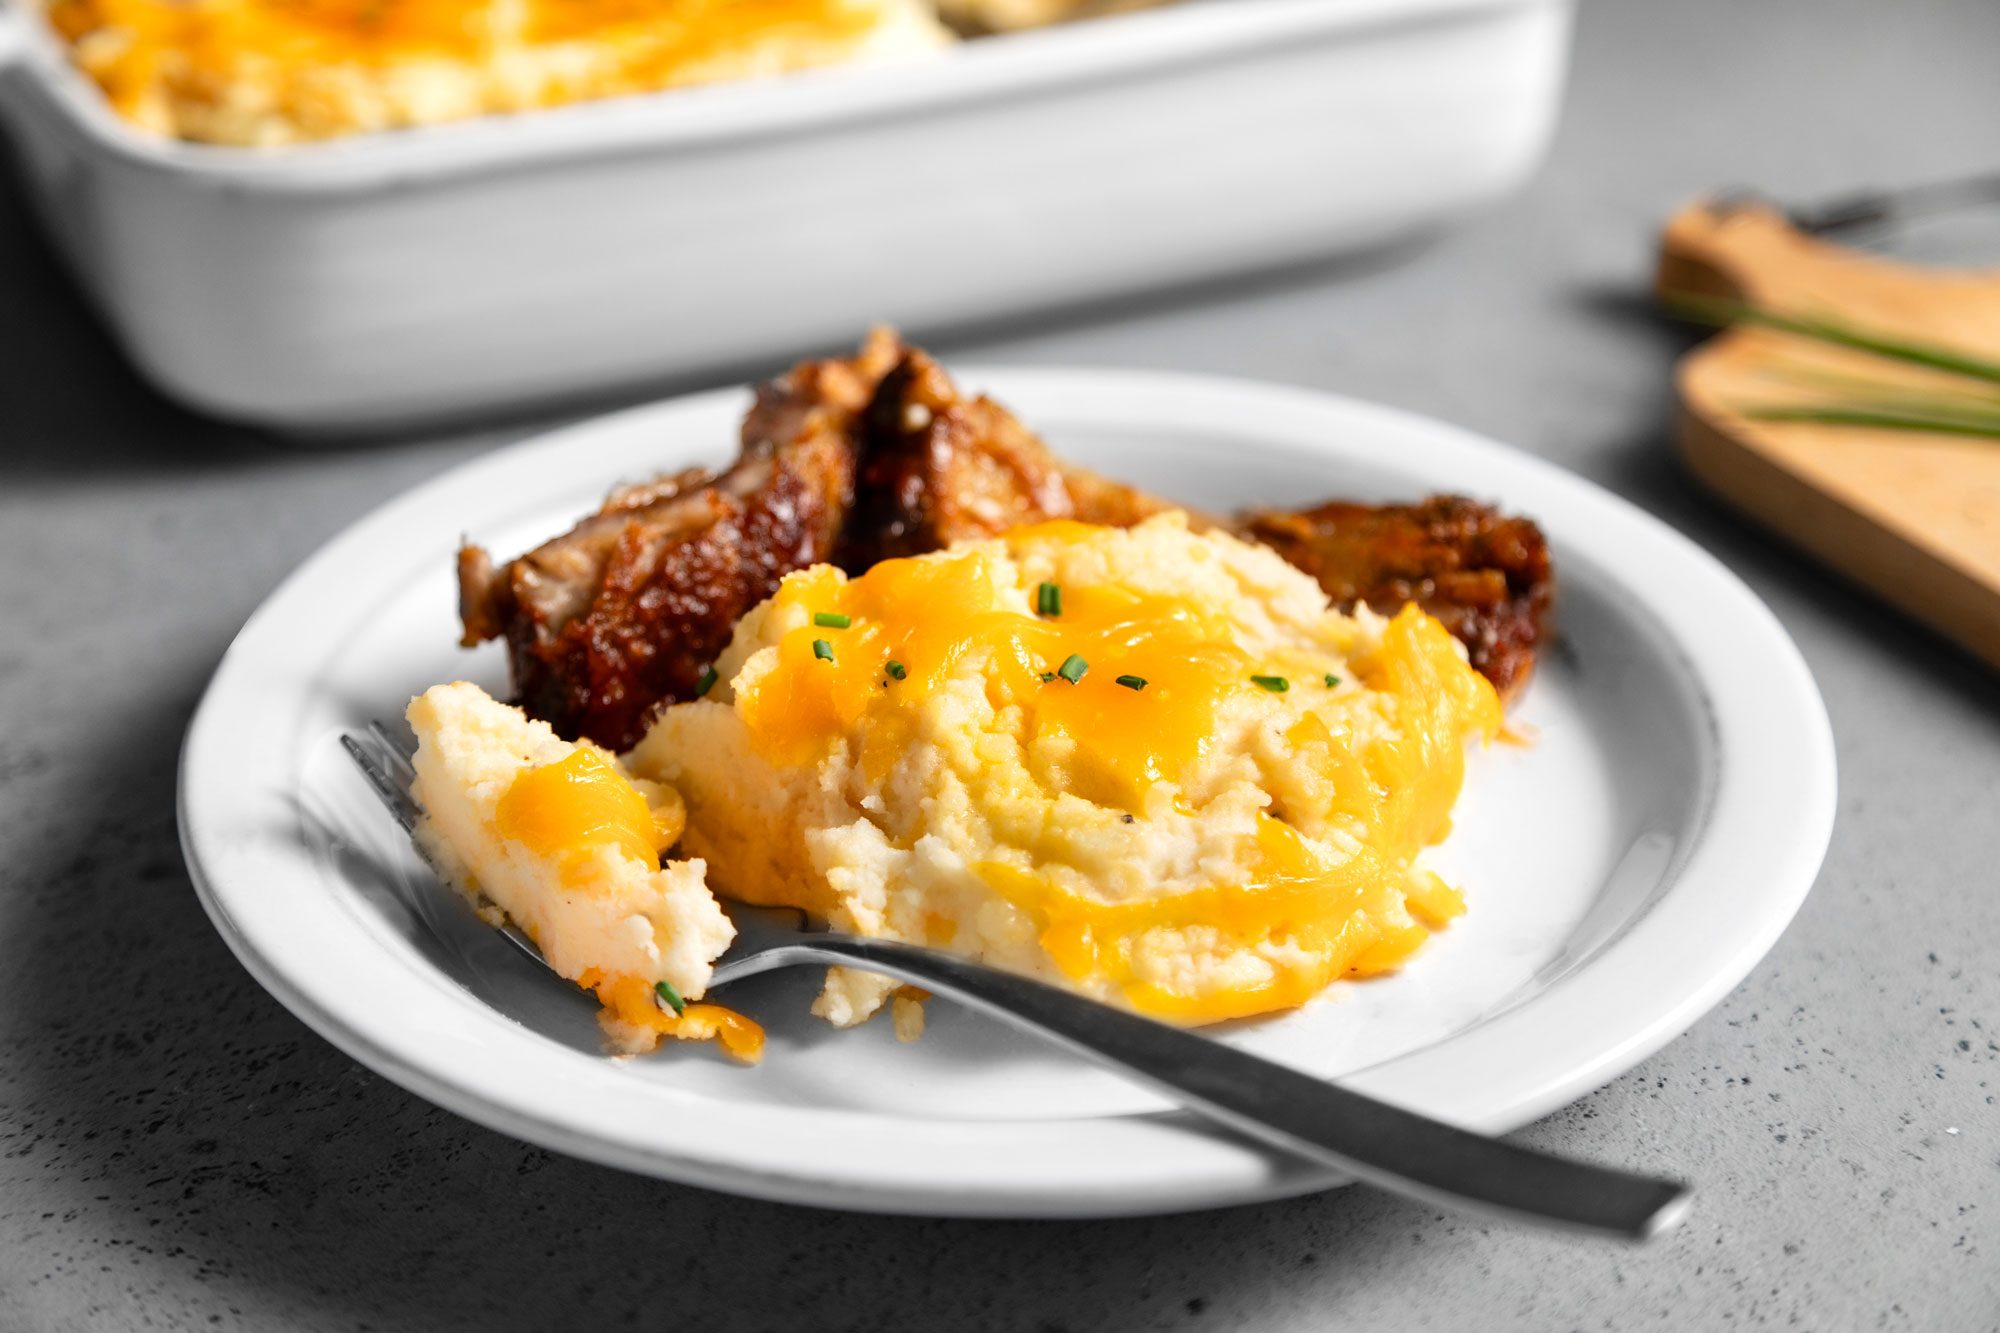 Baked cheesy mashed potatoes topped with savory meat and melted cheese